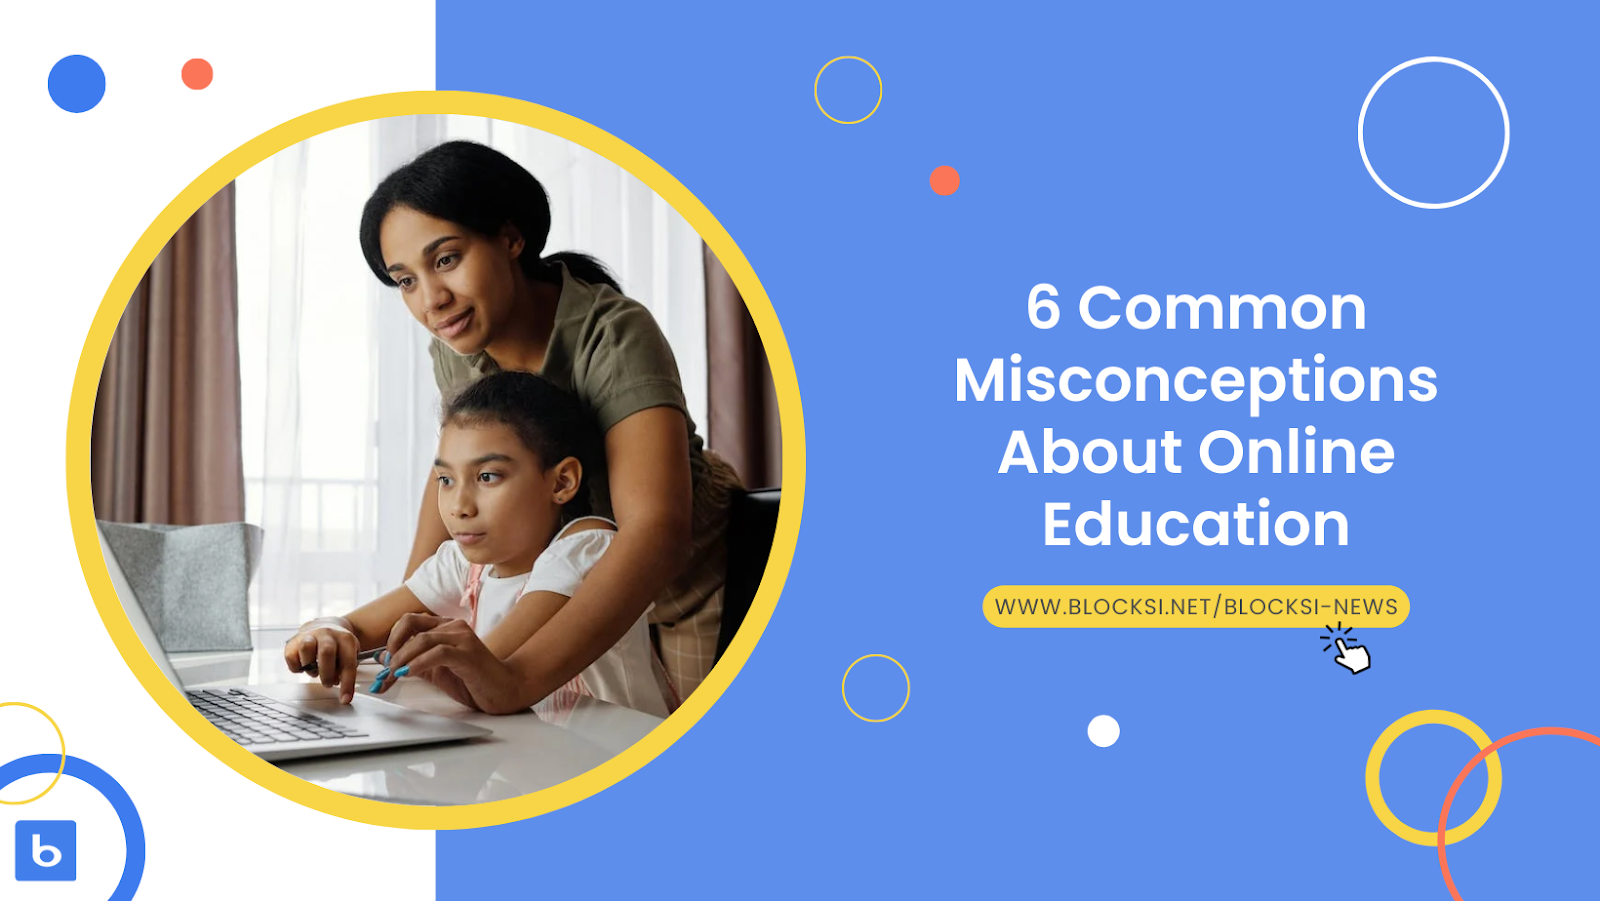 6 Common Misconceptions About Online Education